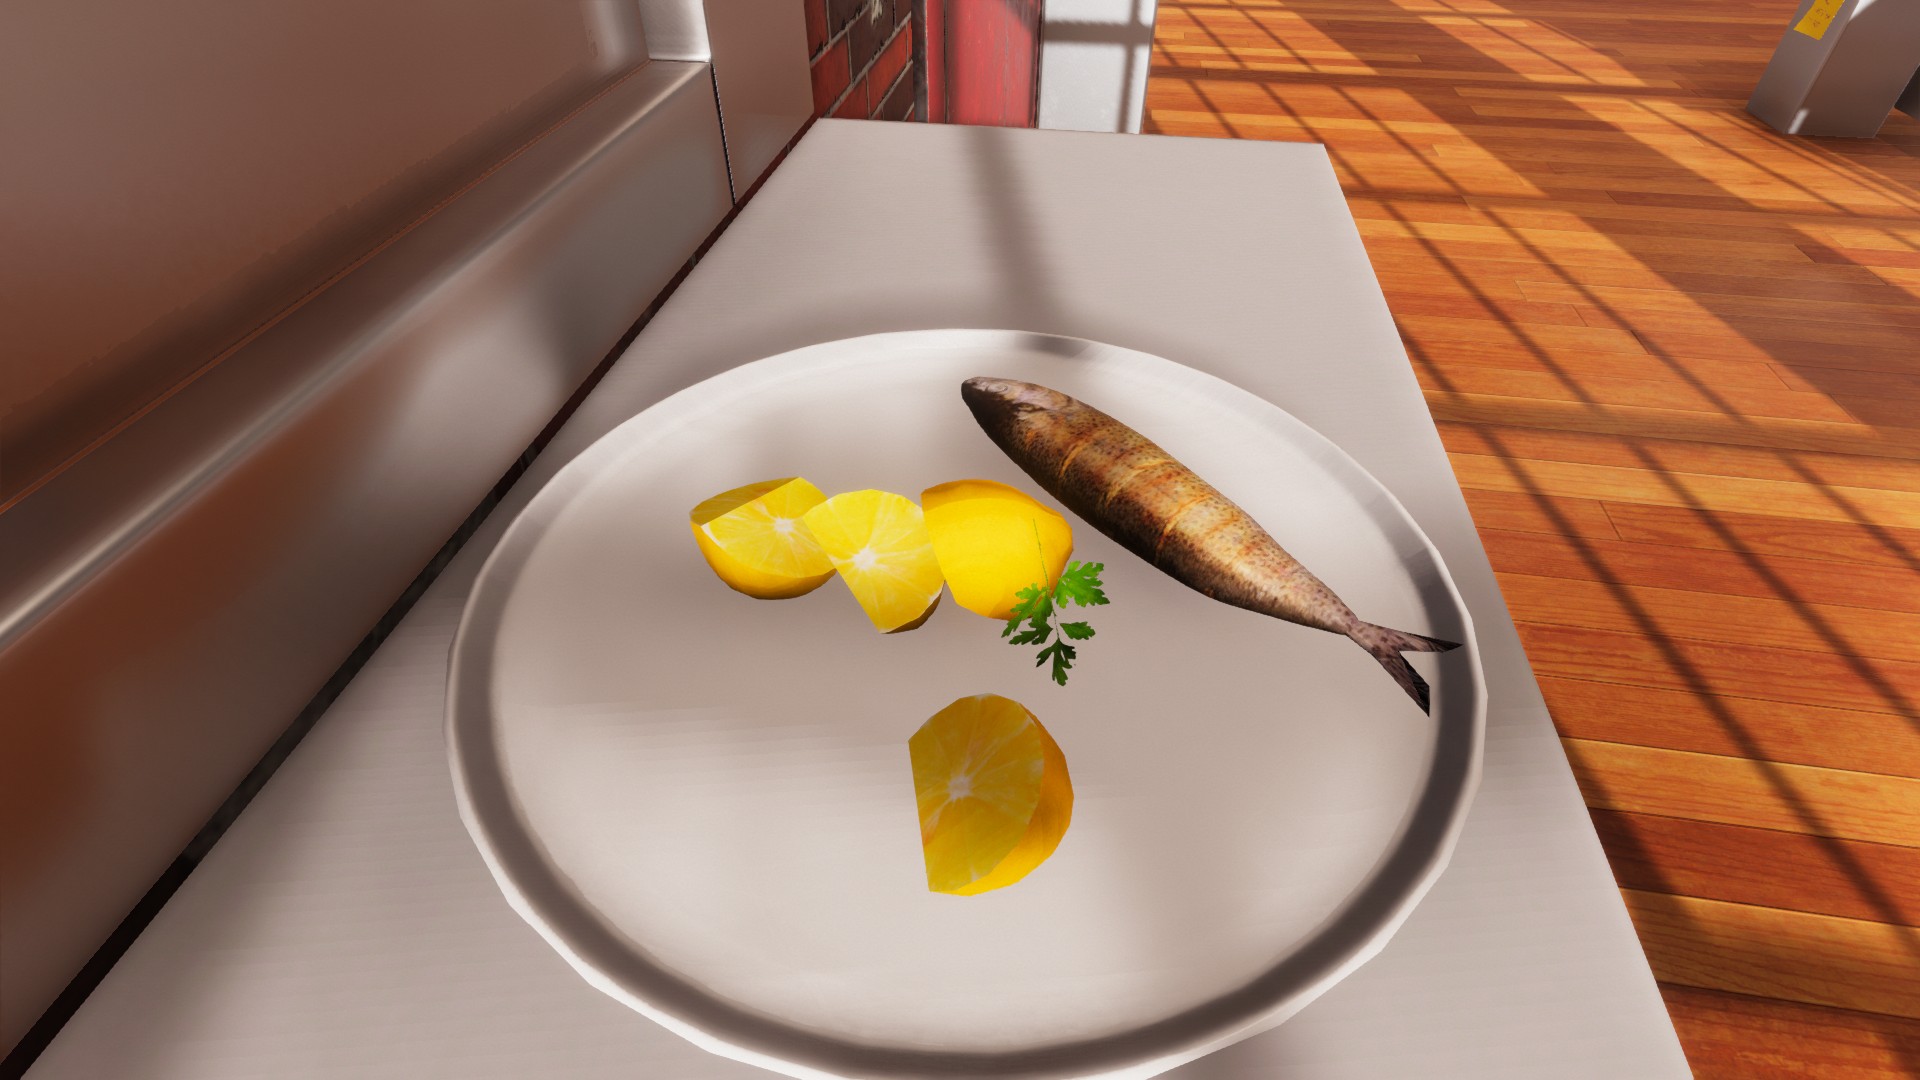 Cooking Simulator Loading Forever